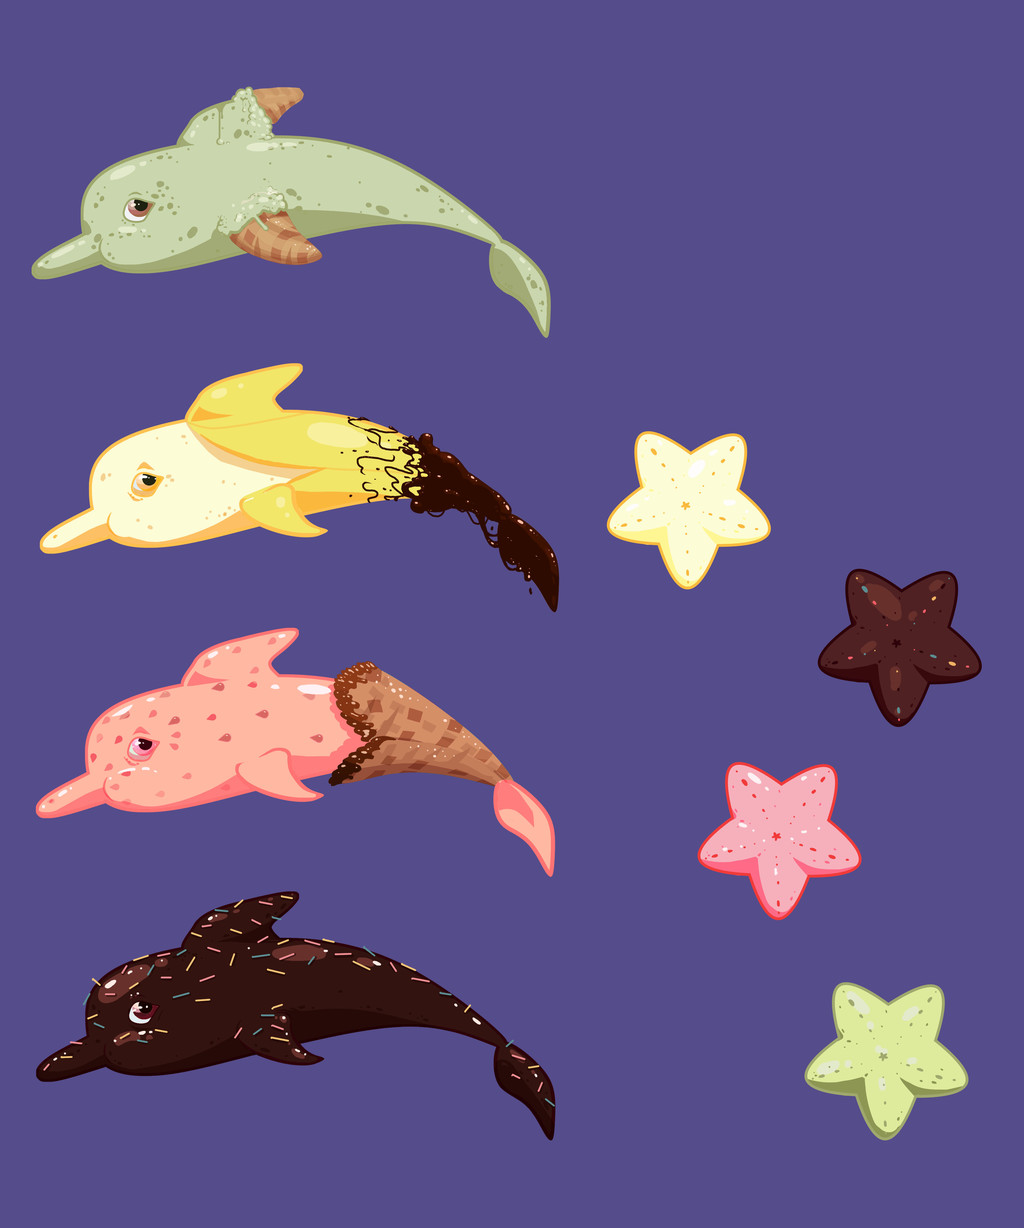 Most recent image: Dolphin Pops!